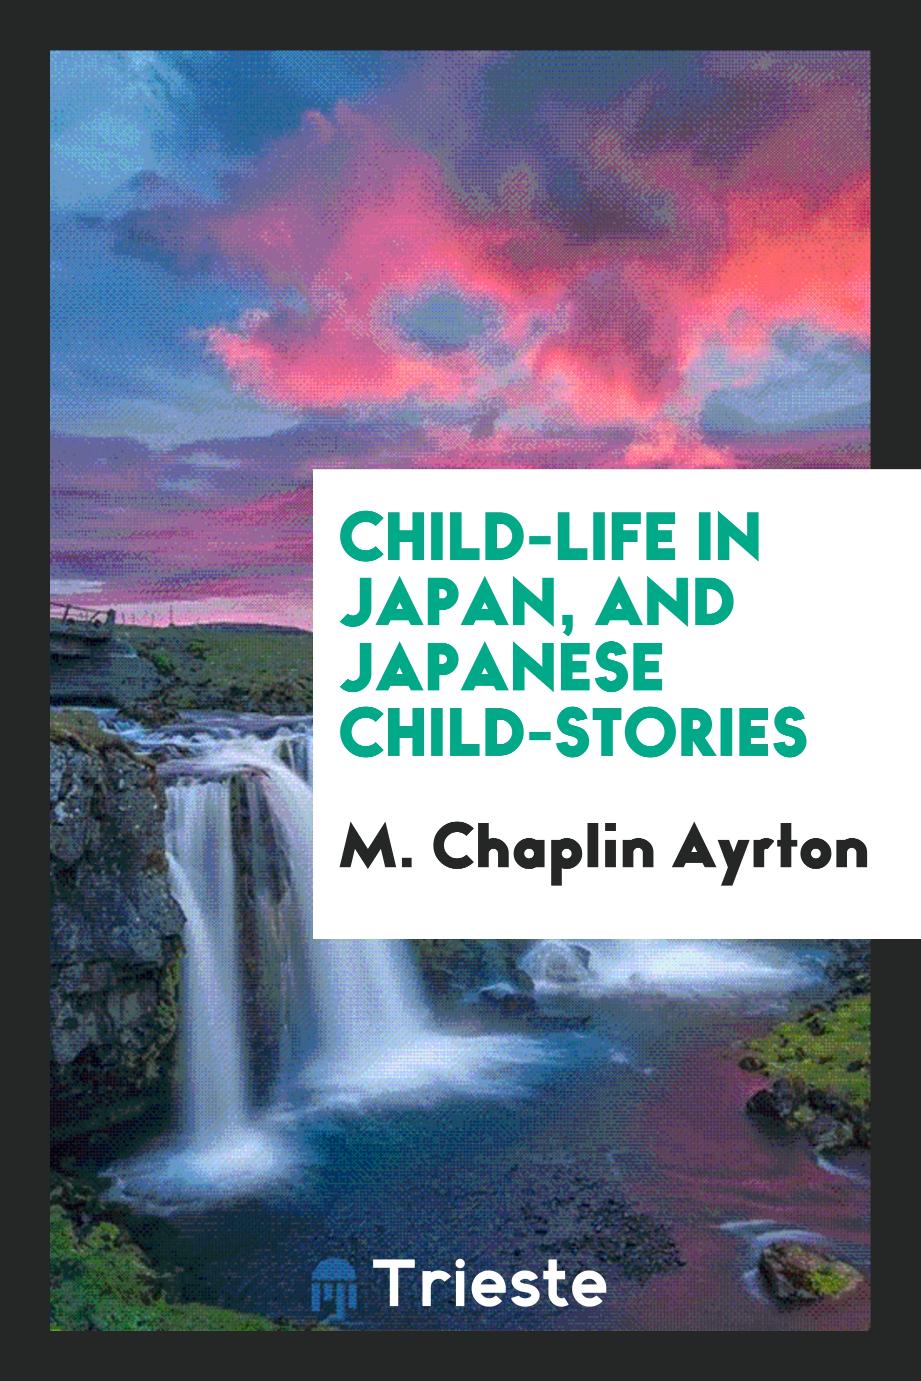 Child-Life in Japan, and Japanese Child-Stories